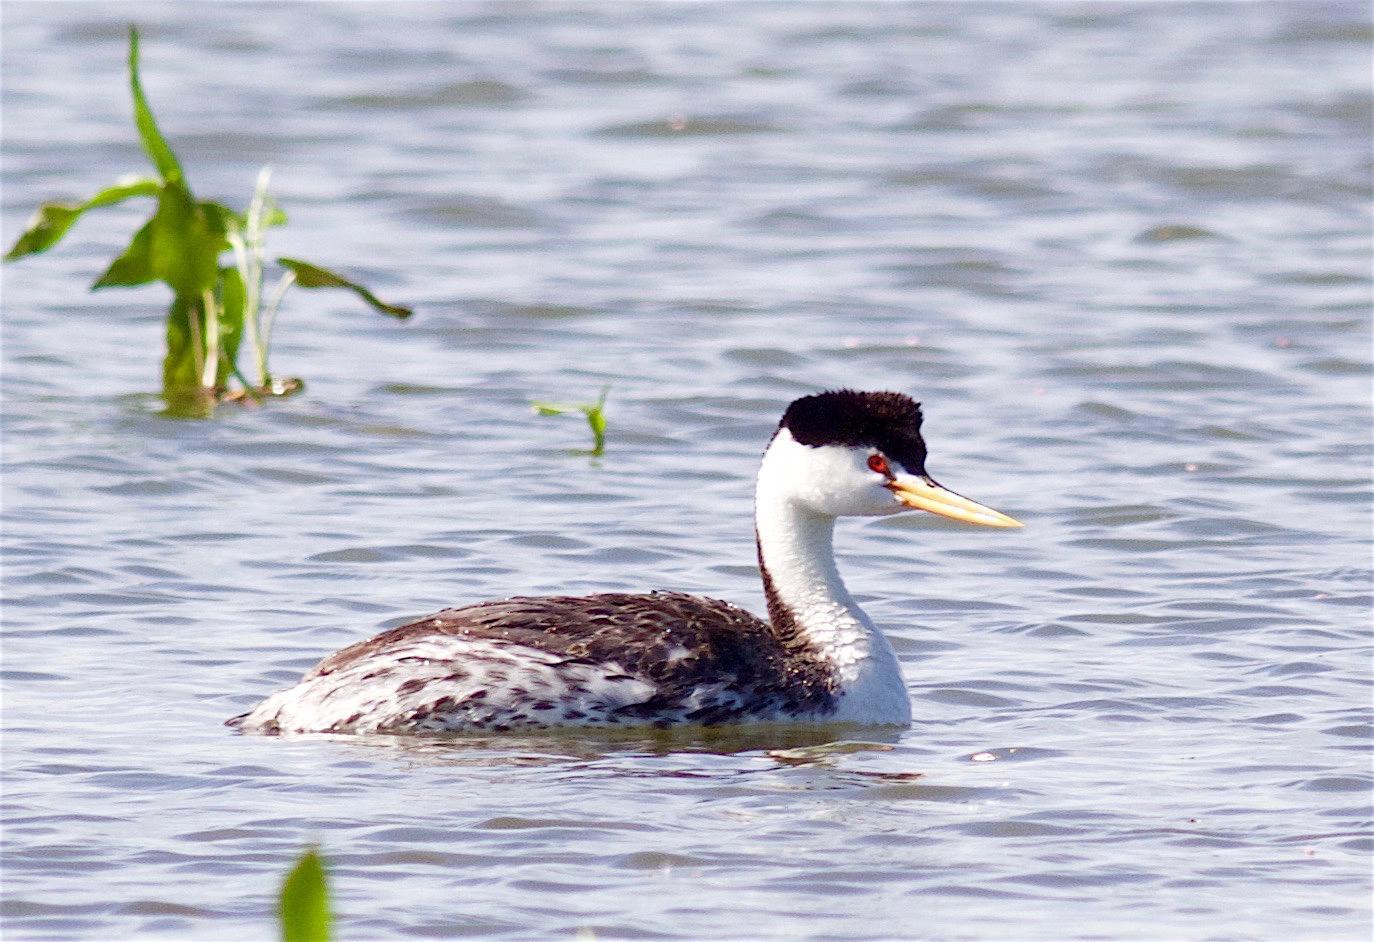 Clark's Grebe Photo by Kathryn Keith